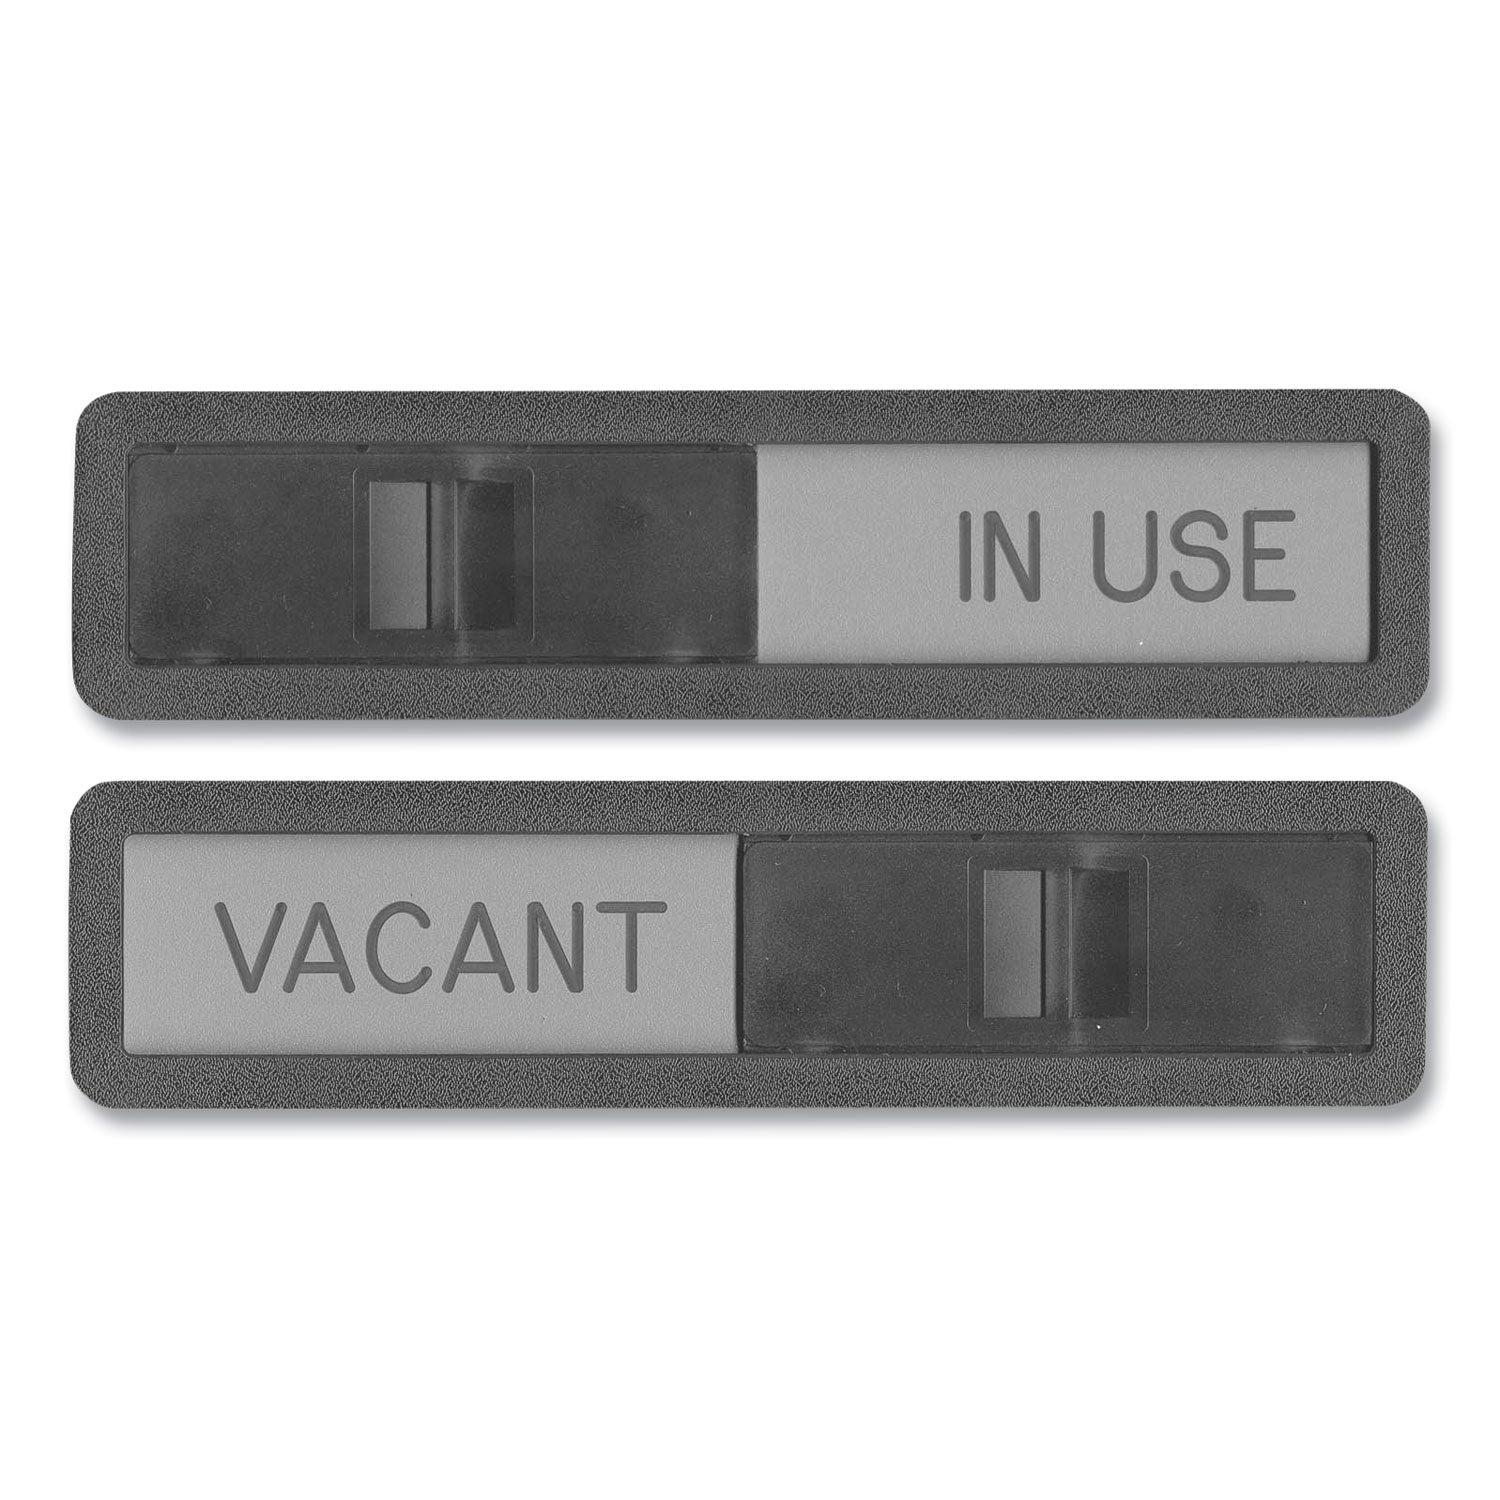 vacant-in-use-sign-in-use;-vacant-25-x-105-black-silver_uss1519 - 1